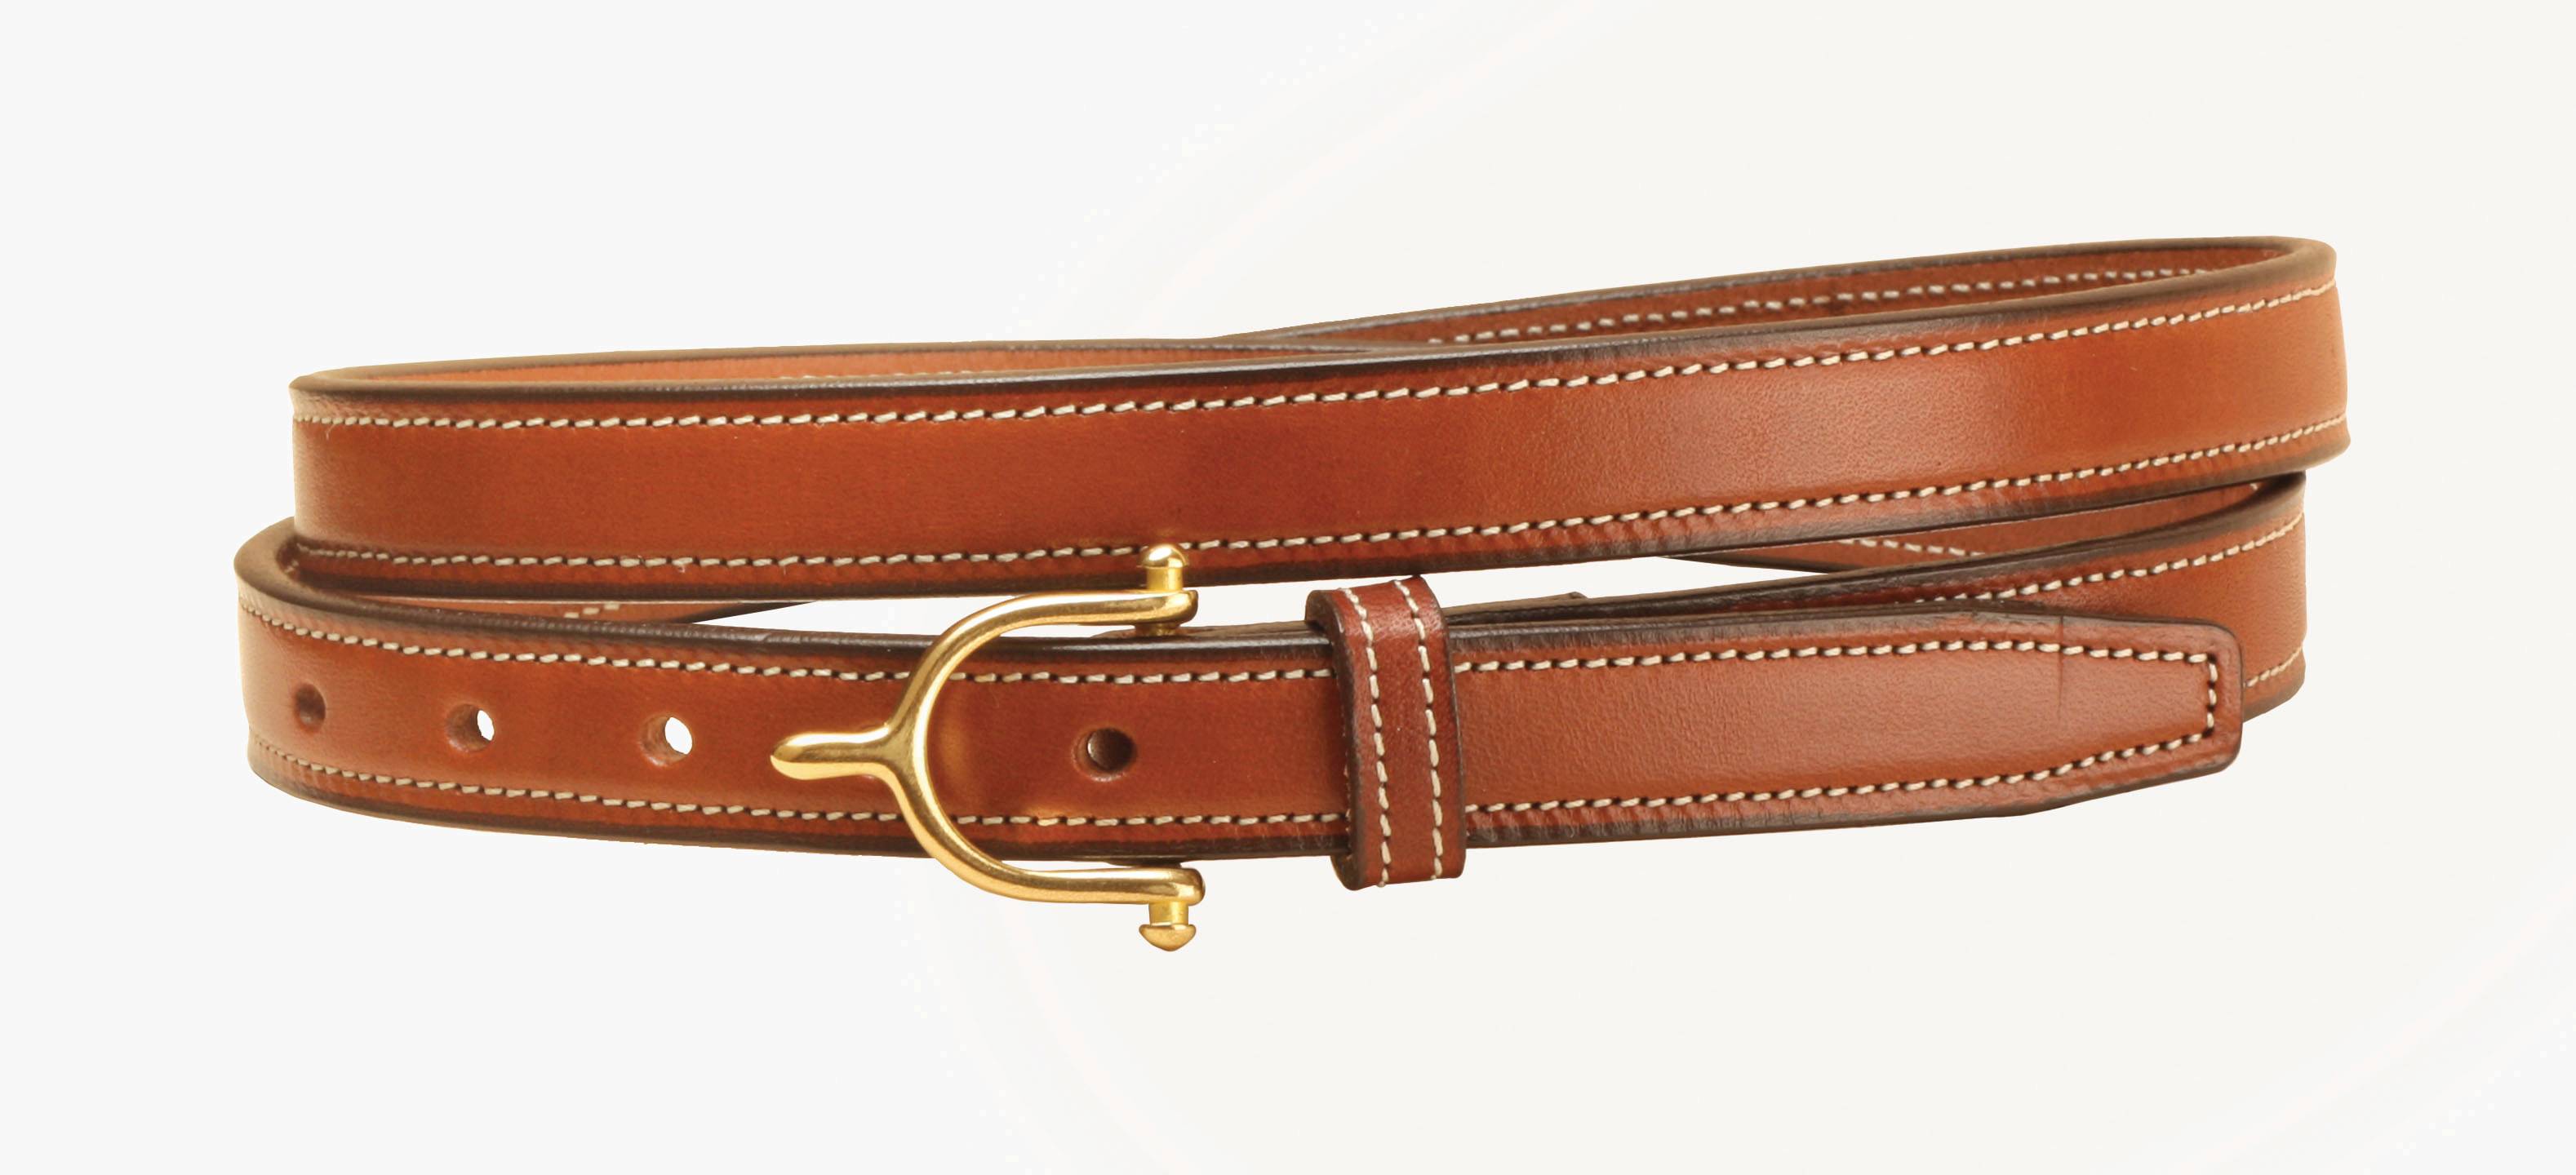 TORY LEATHER 1 Belt with Spur Buckle | EquestrianCollections